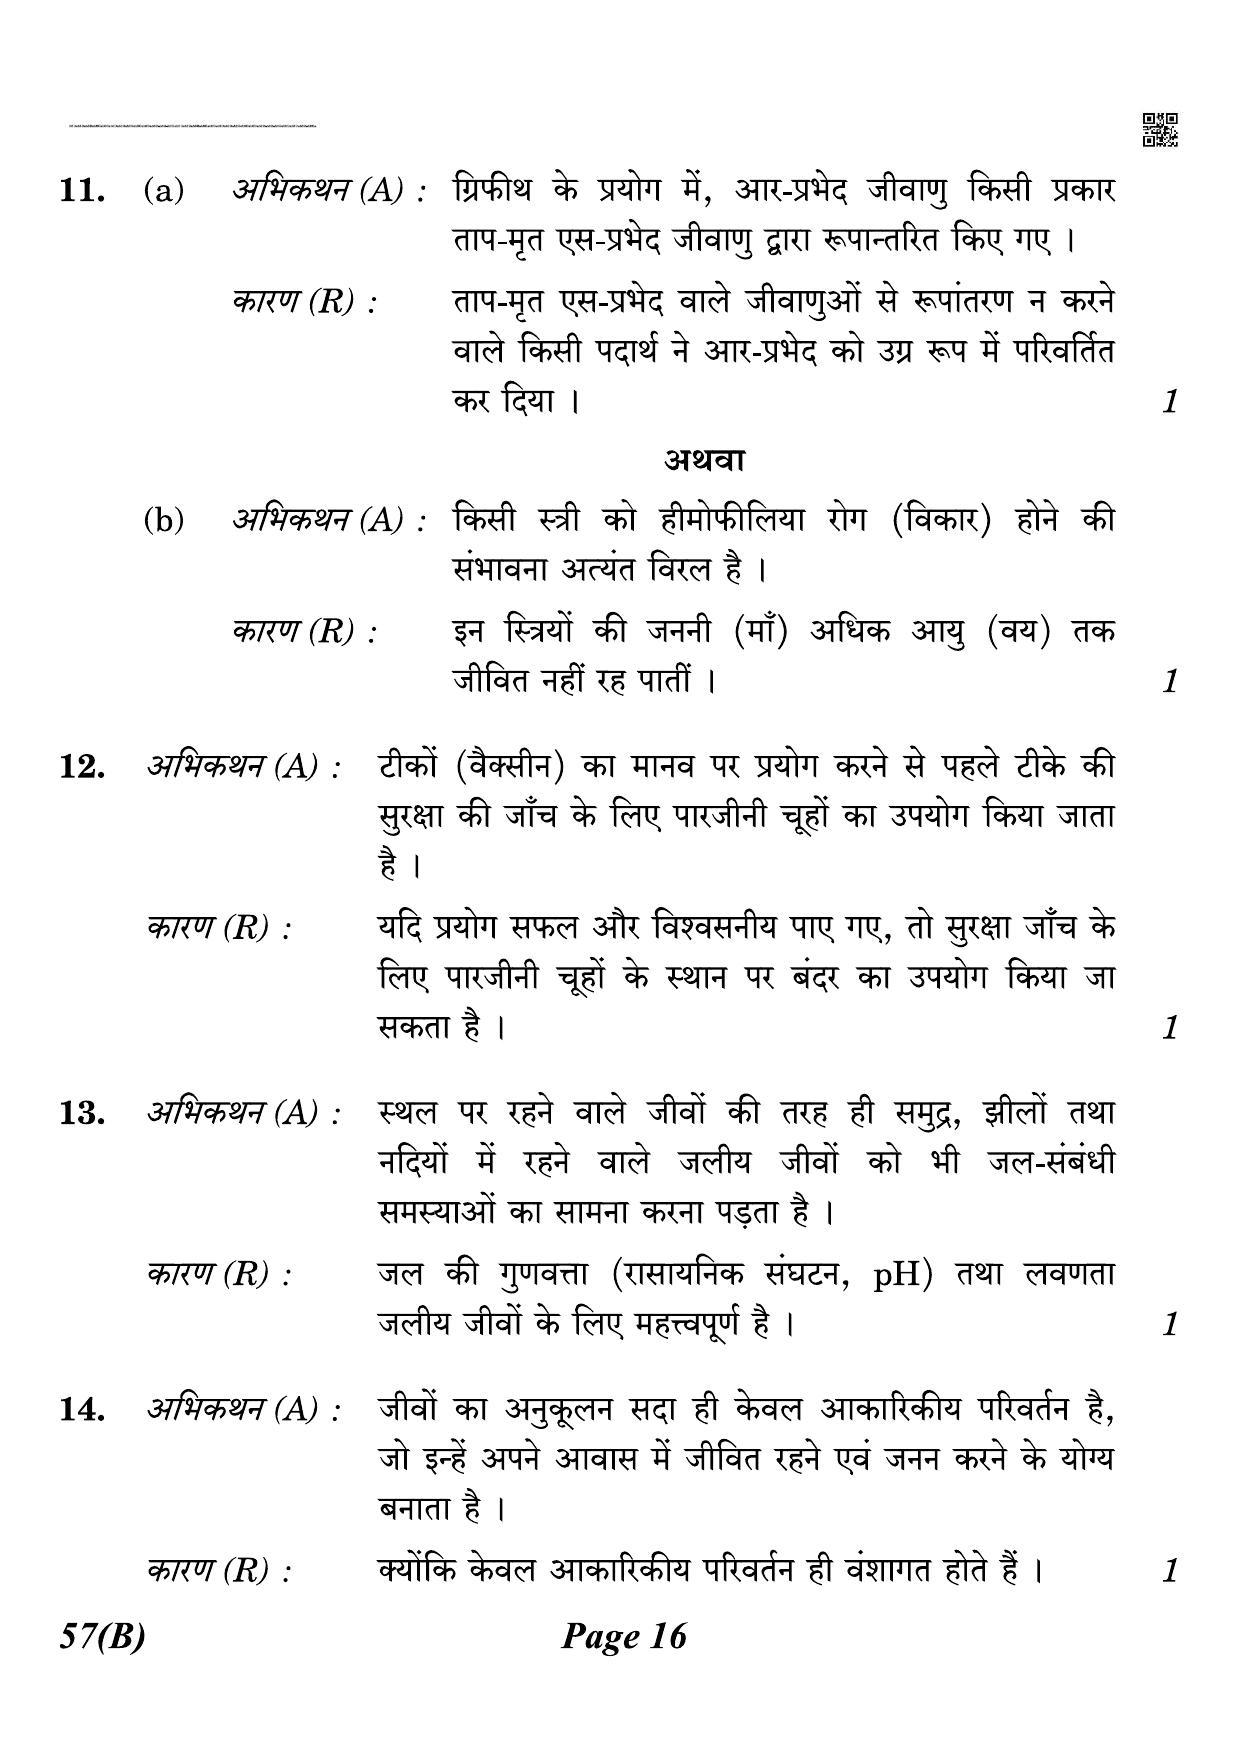 CBSE Class 12 QP_044_biology_for_visually_impared_candidates 2021 Compartment Question Paper - Page 16